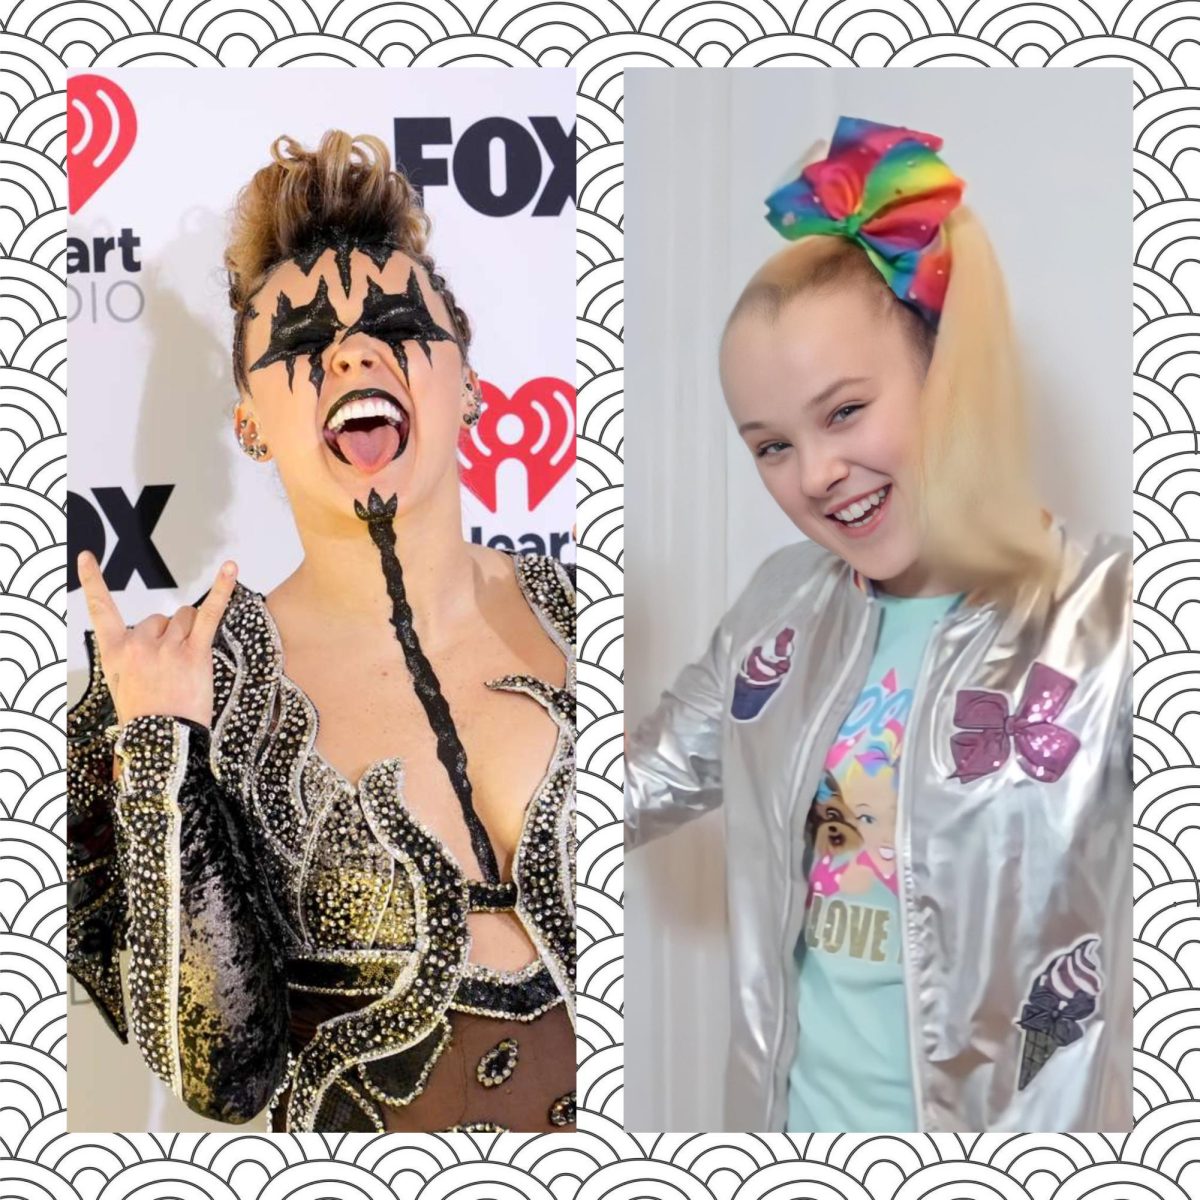 Child star Jojo Siwa before and after her infamous transformation. Photo Illustration.
